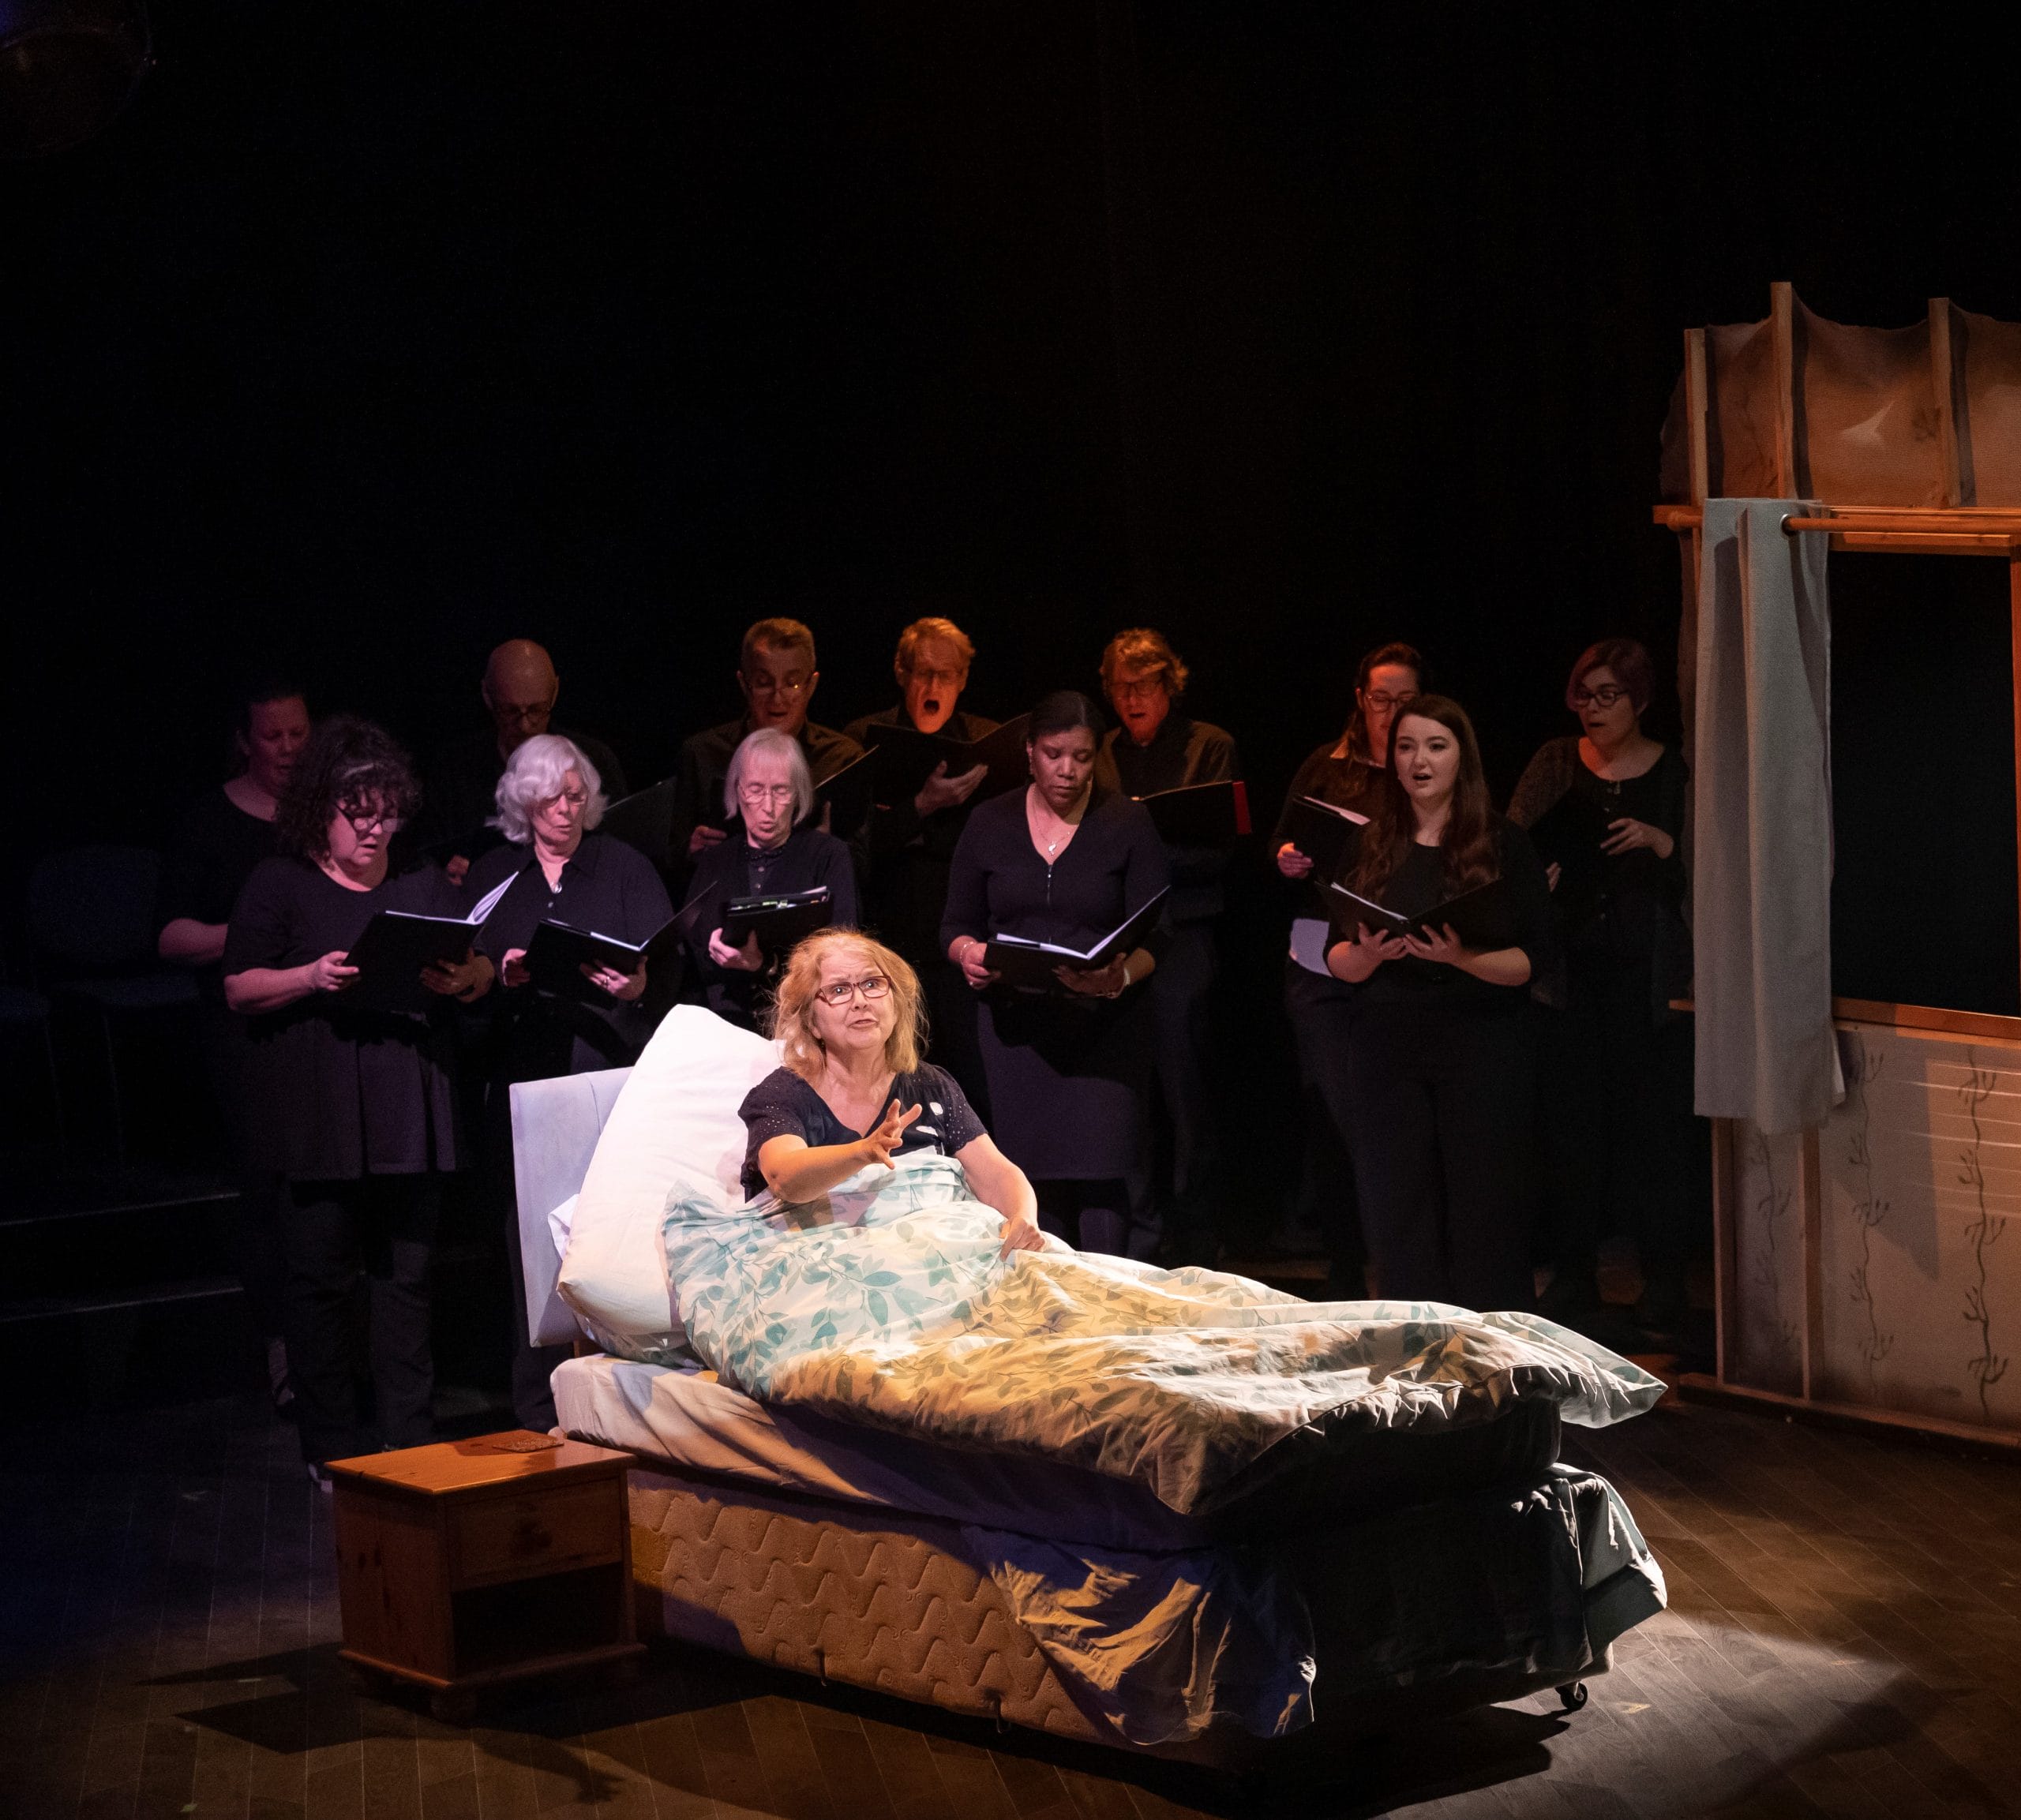 A woman in bed reaches out as a choir sings around her